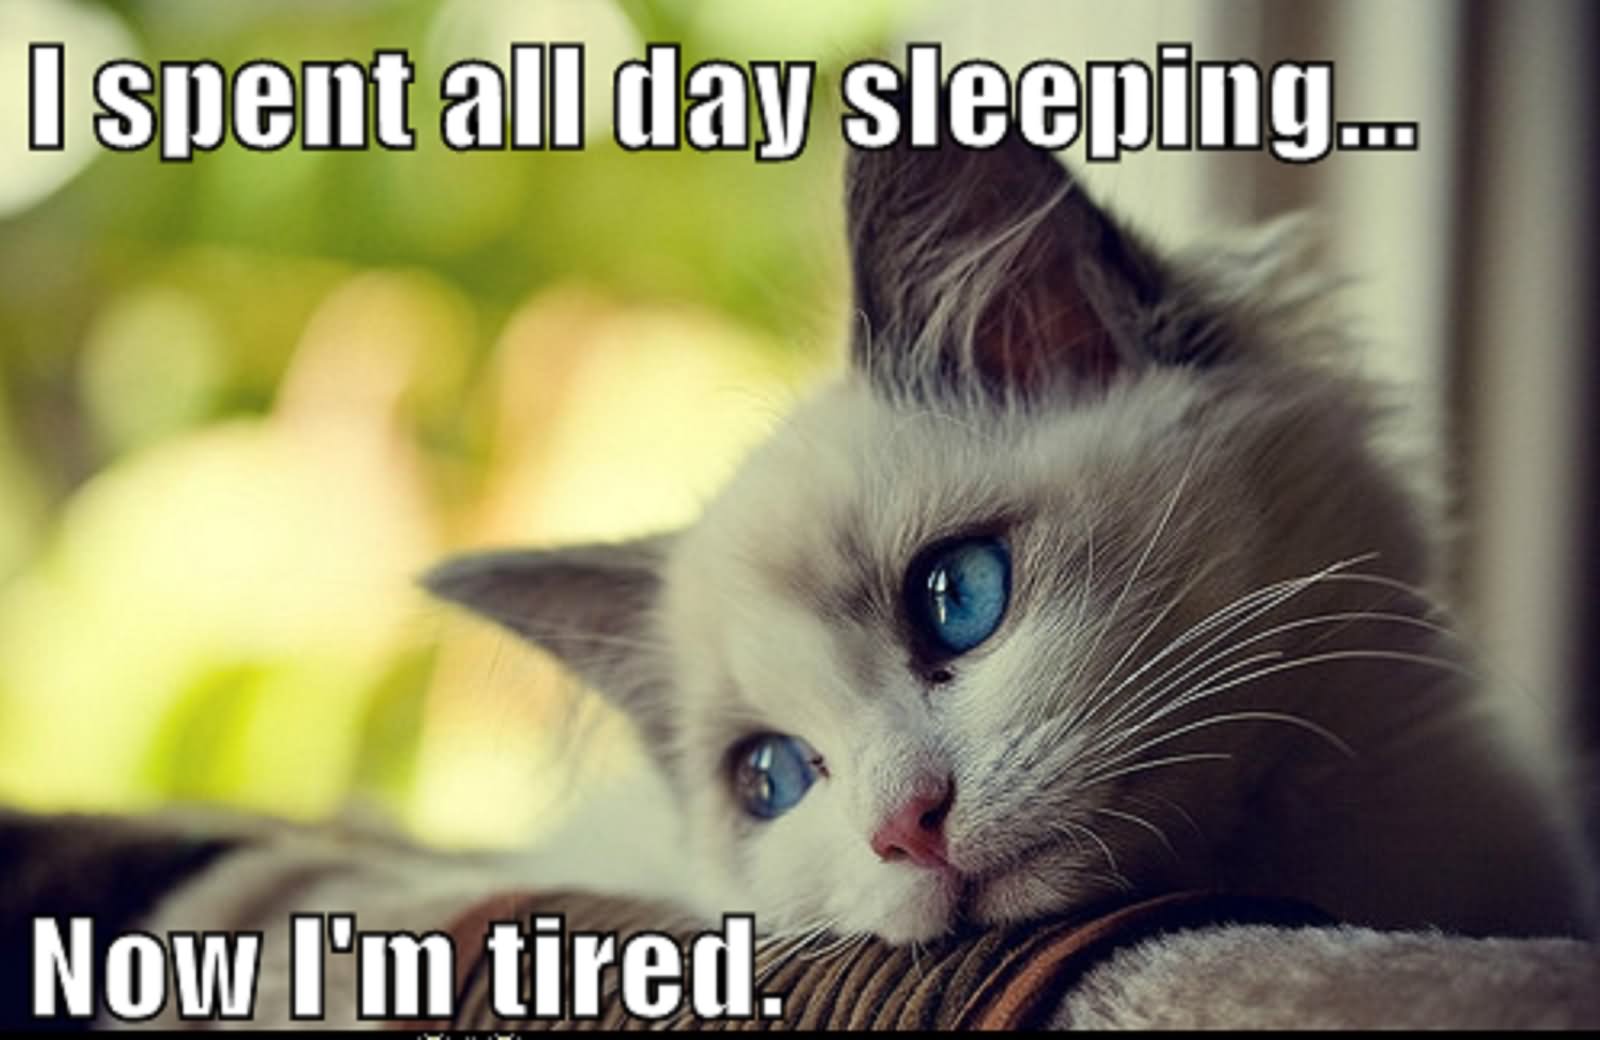 I Spent All Day Sleeping Now I Am Tired Funny Animal Cat Meme Image